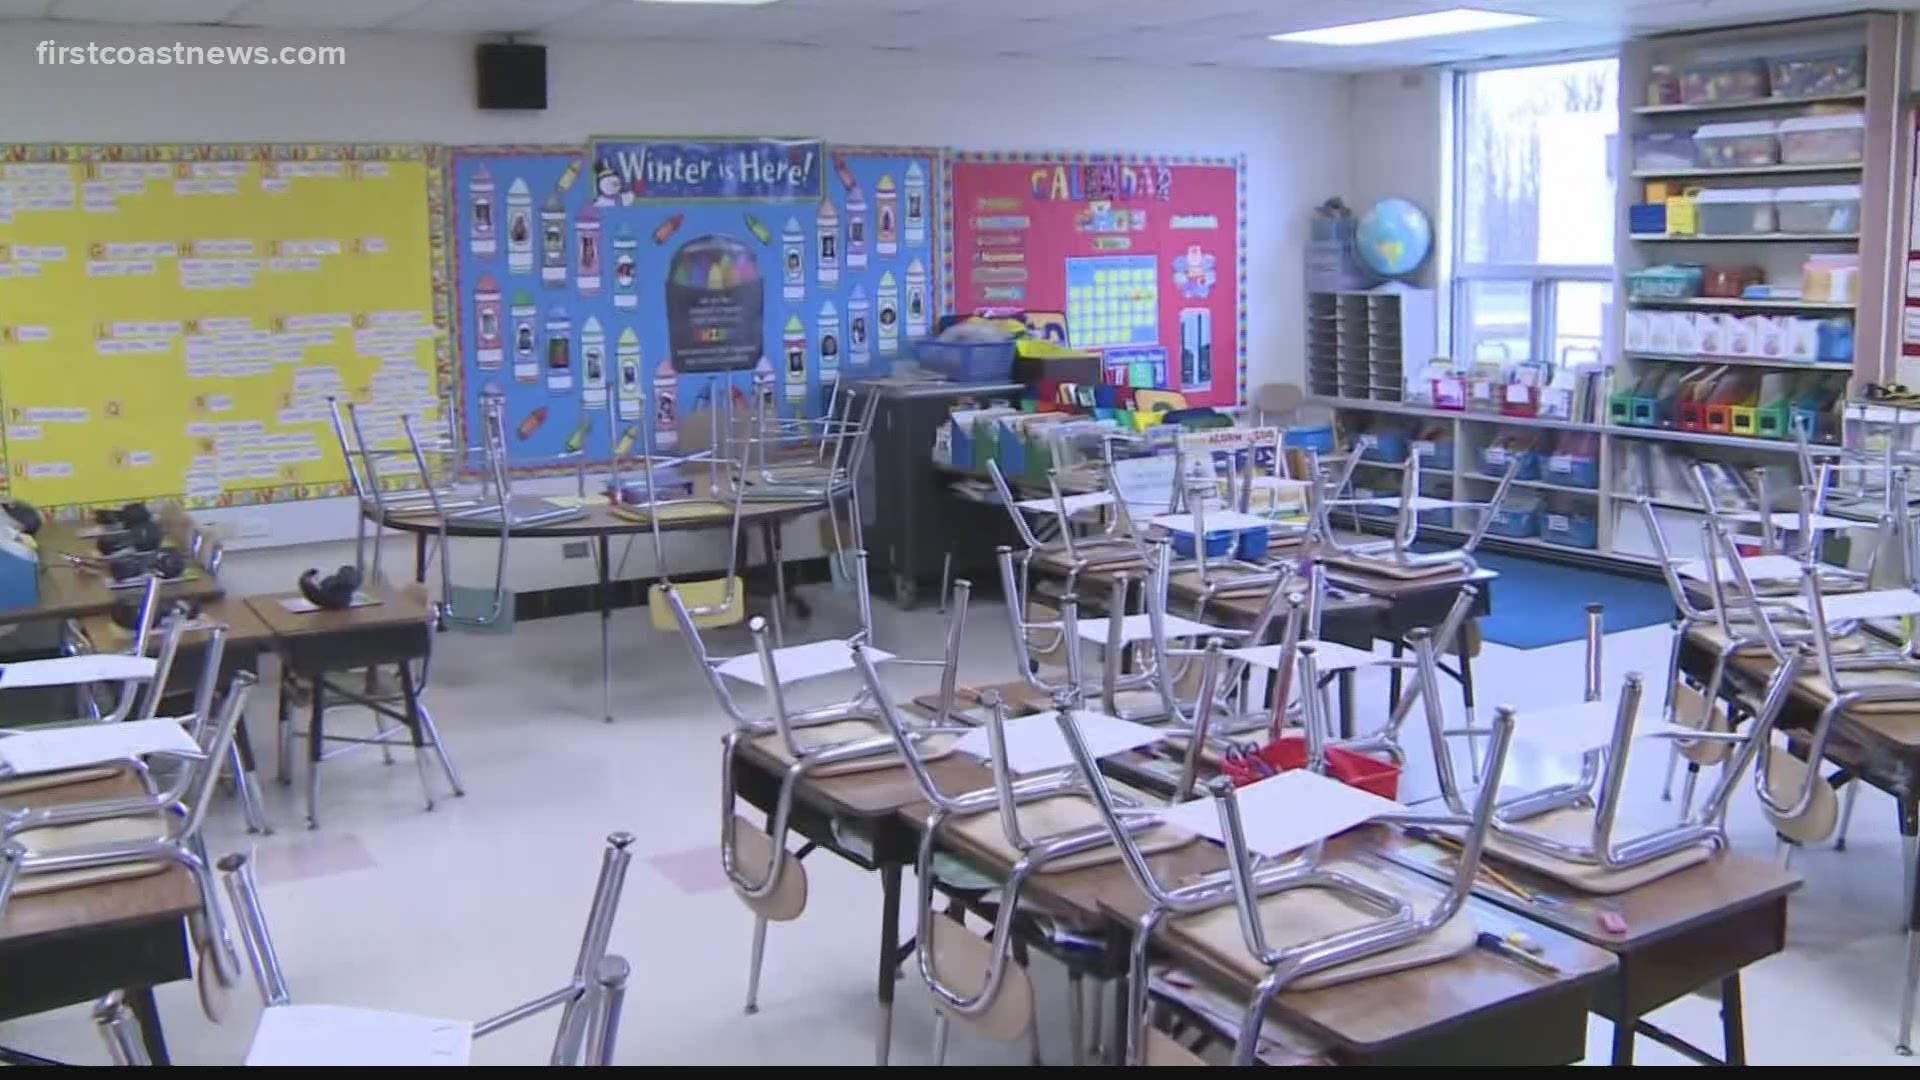 A Duval County teacher resigned due to fears of COVID-19.